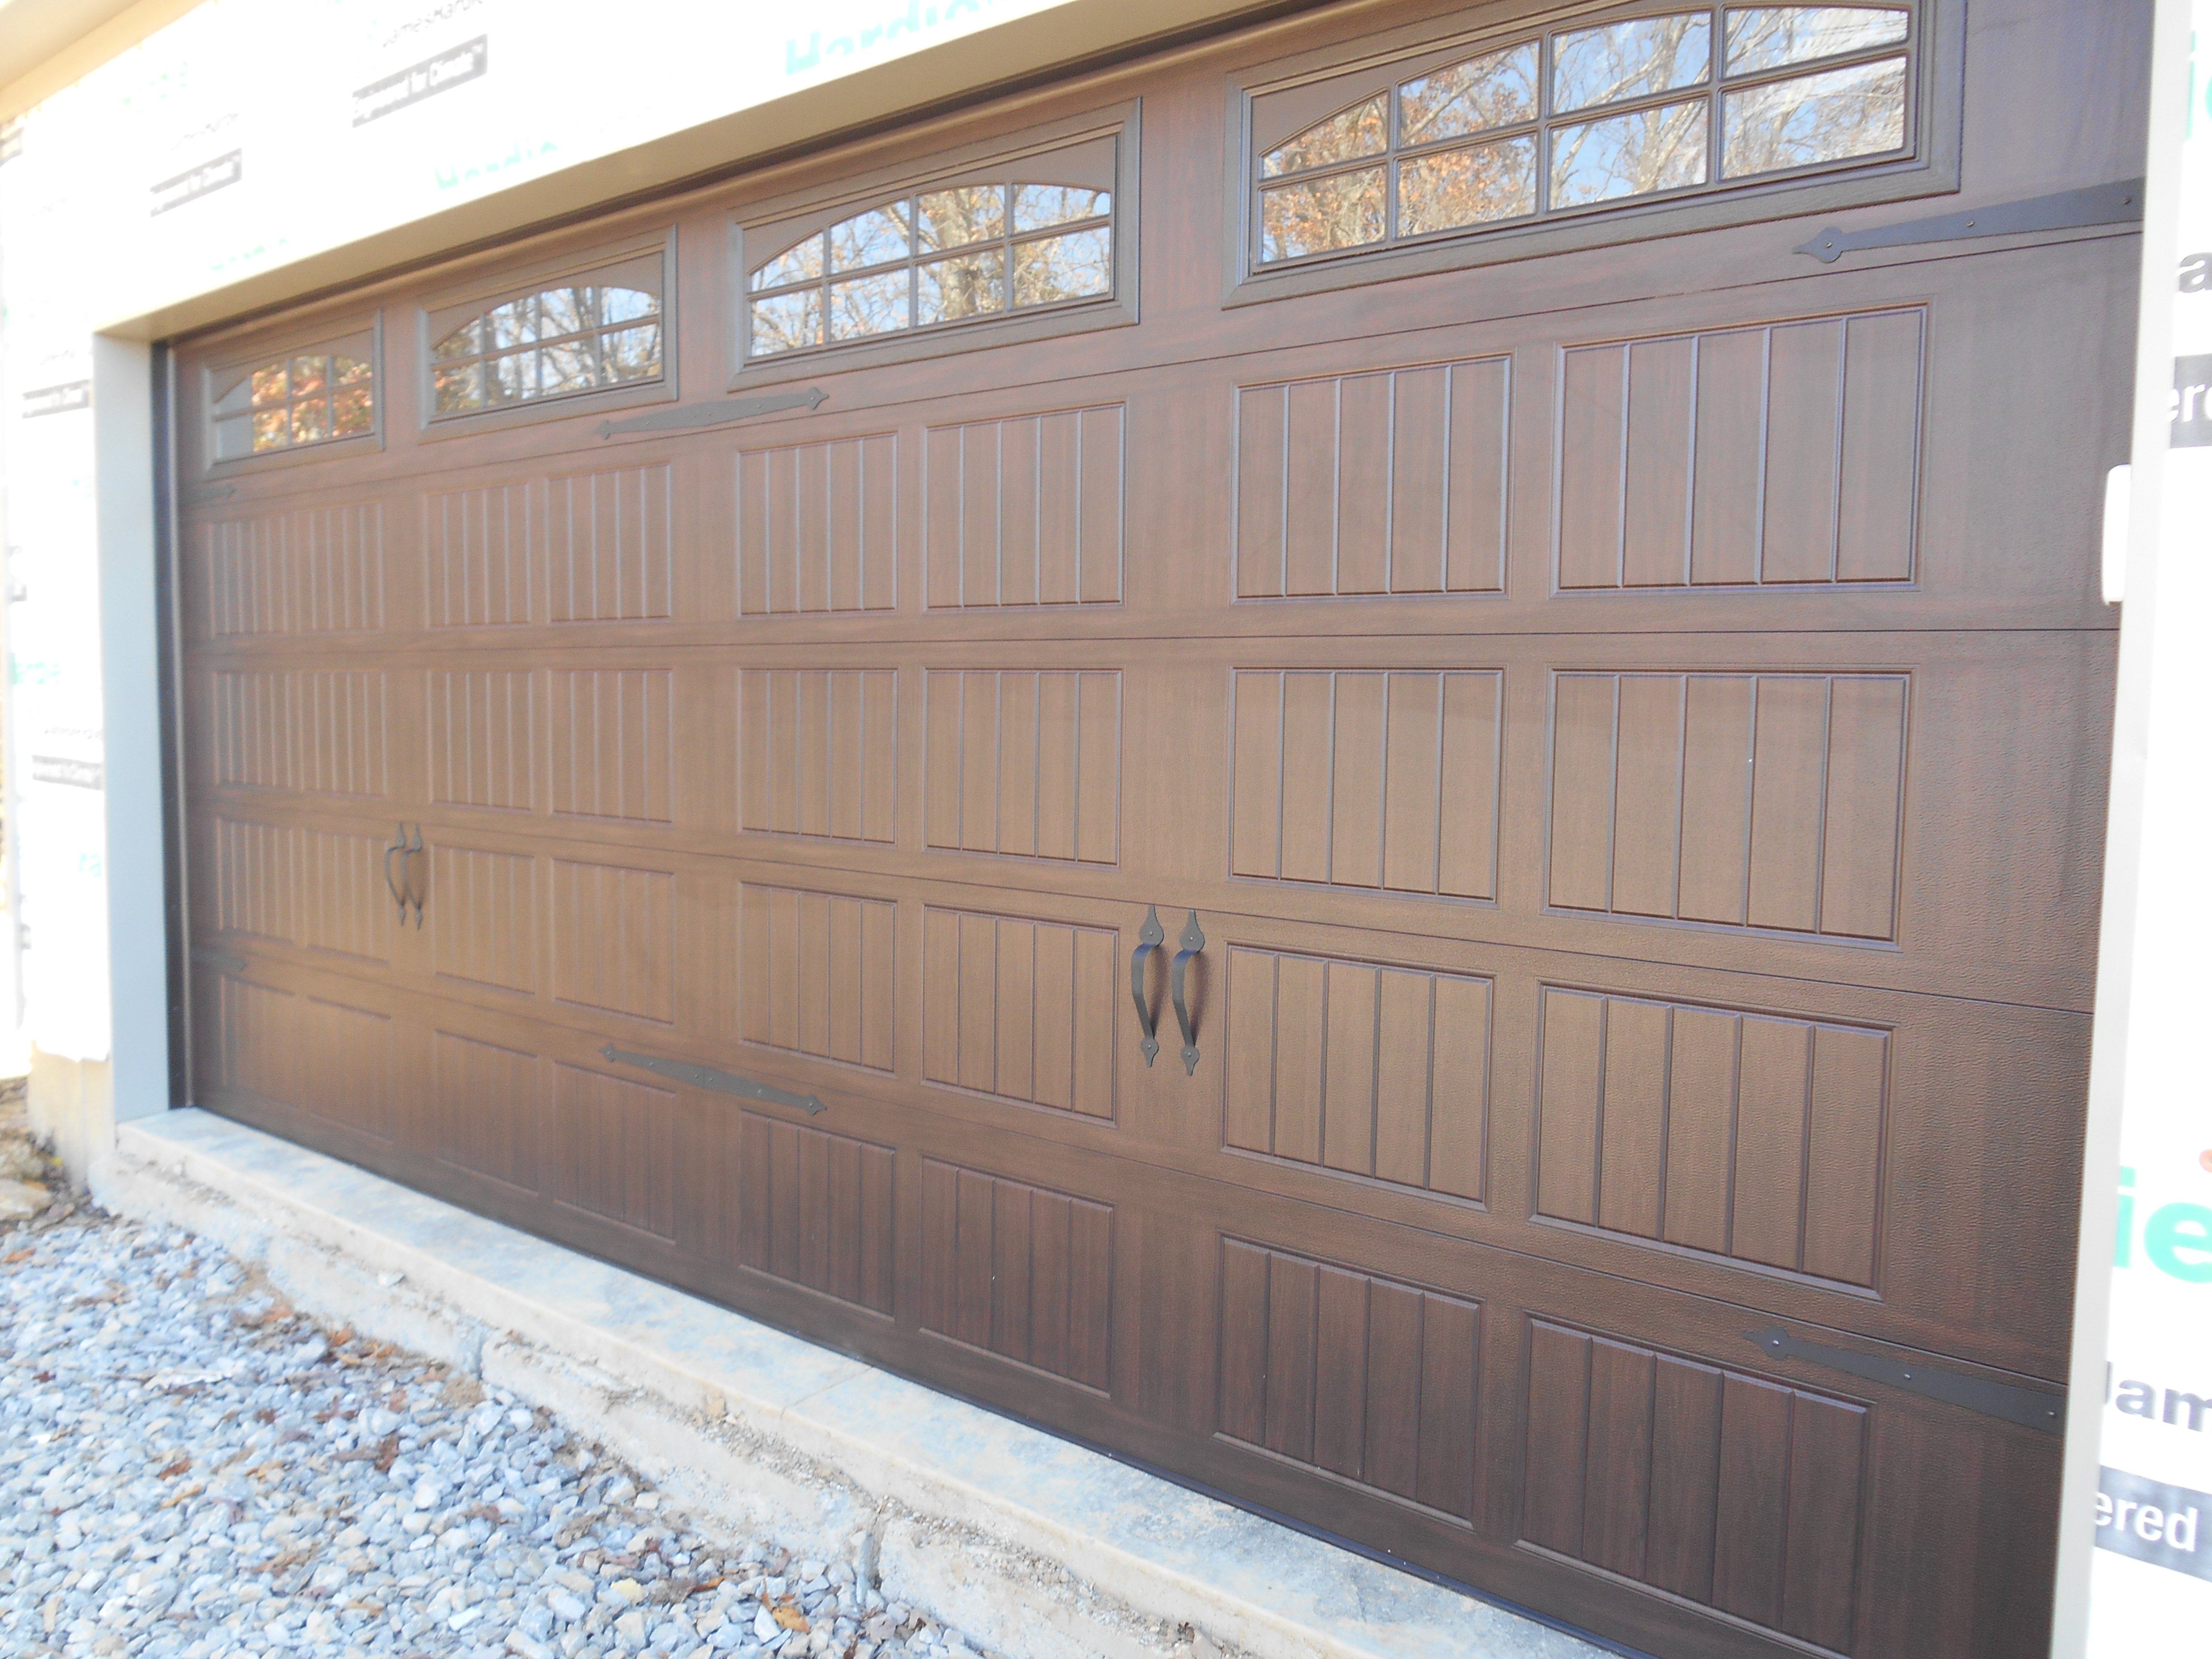 Thermacore Collection 199 Series Color: Walnut wood grain Stockton II window trim